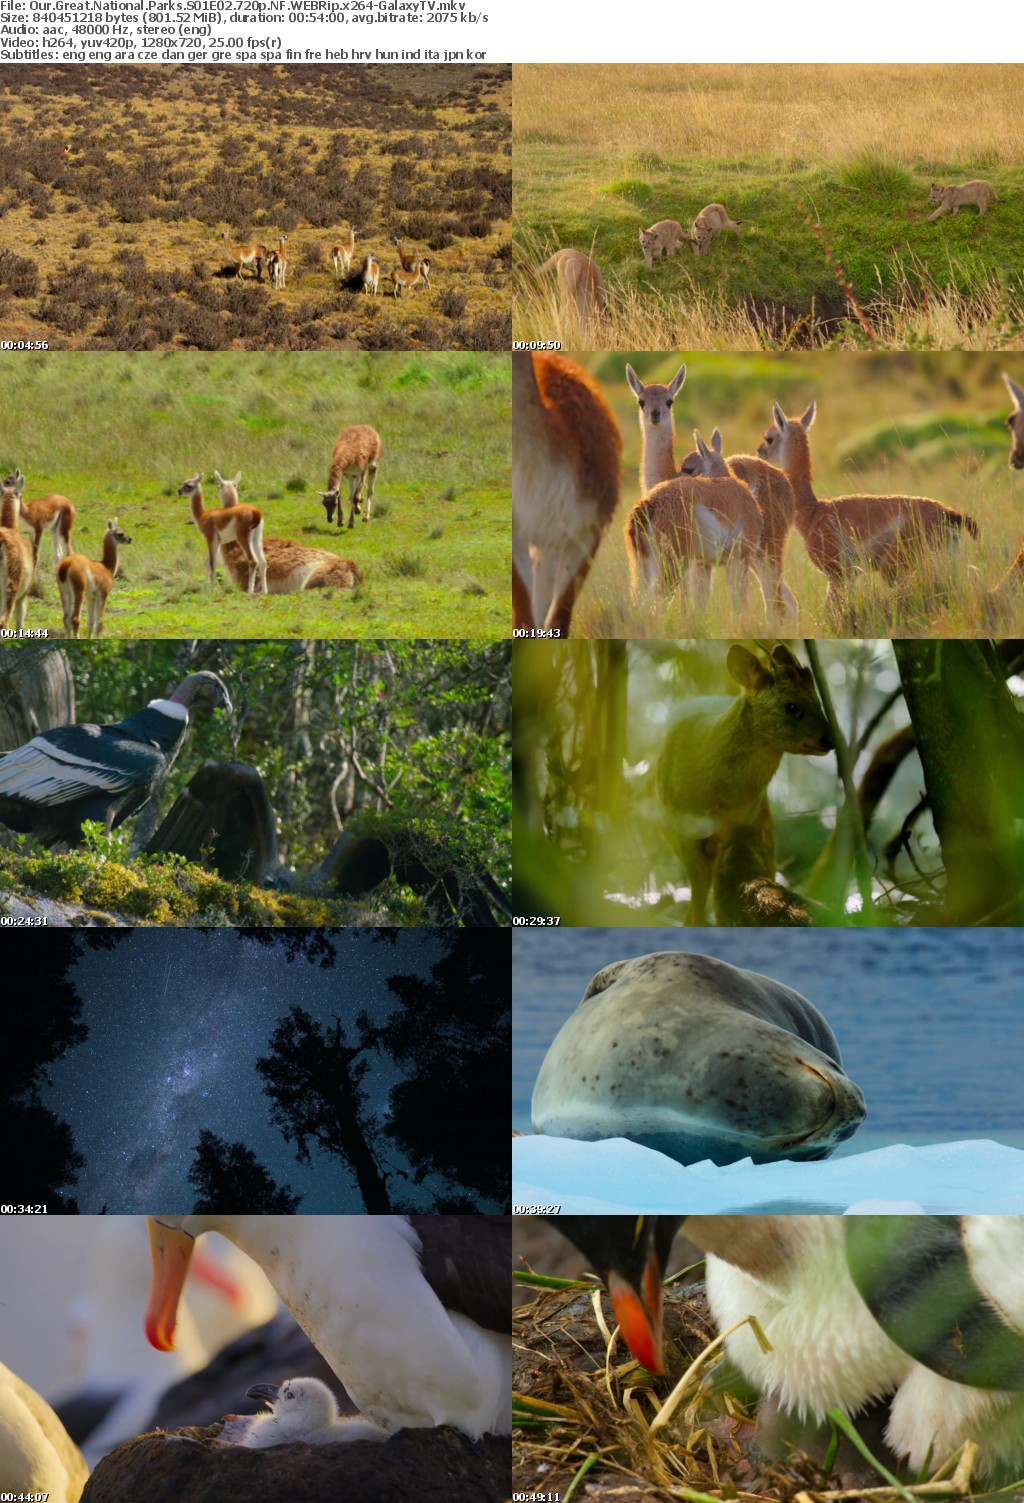 Our Great National Parks S01 COMPLETE 720p NF WEBRip x264-GalaxyTV